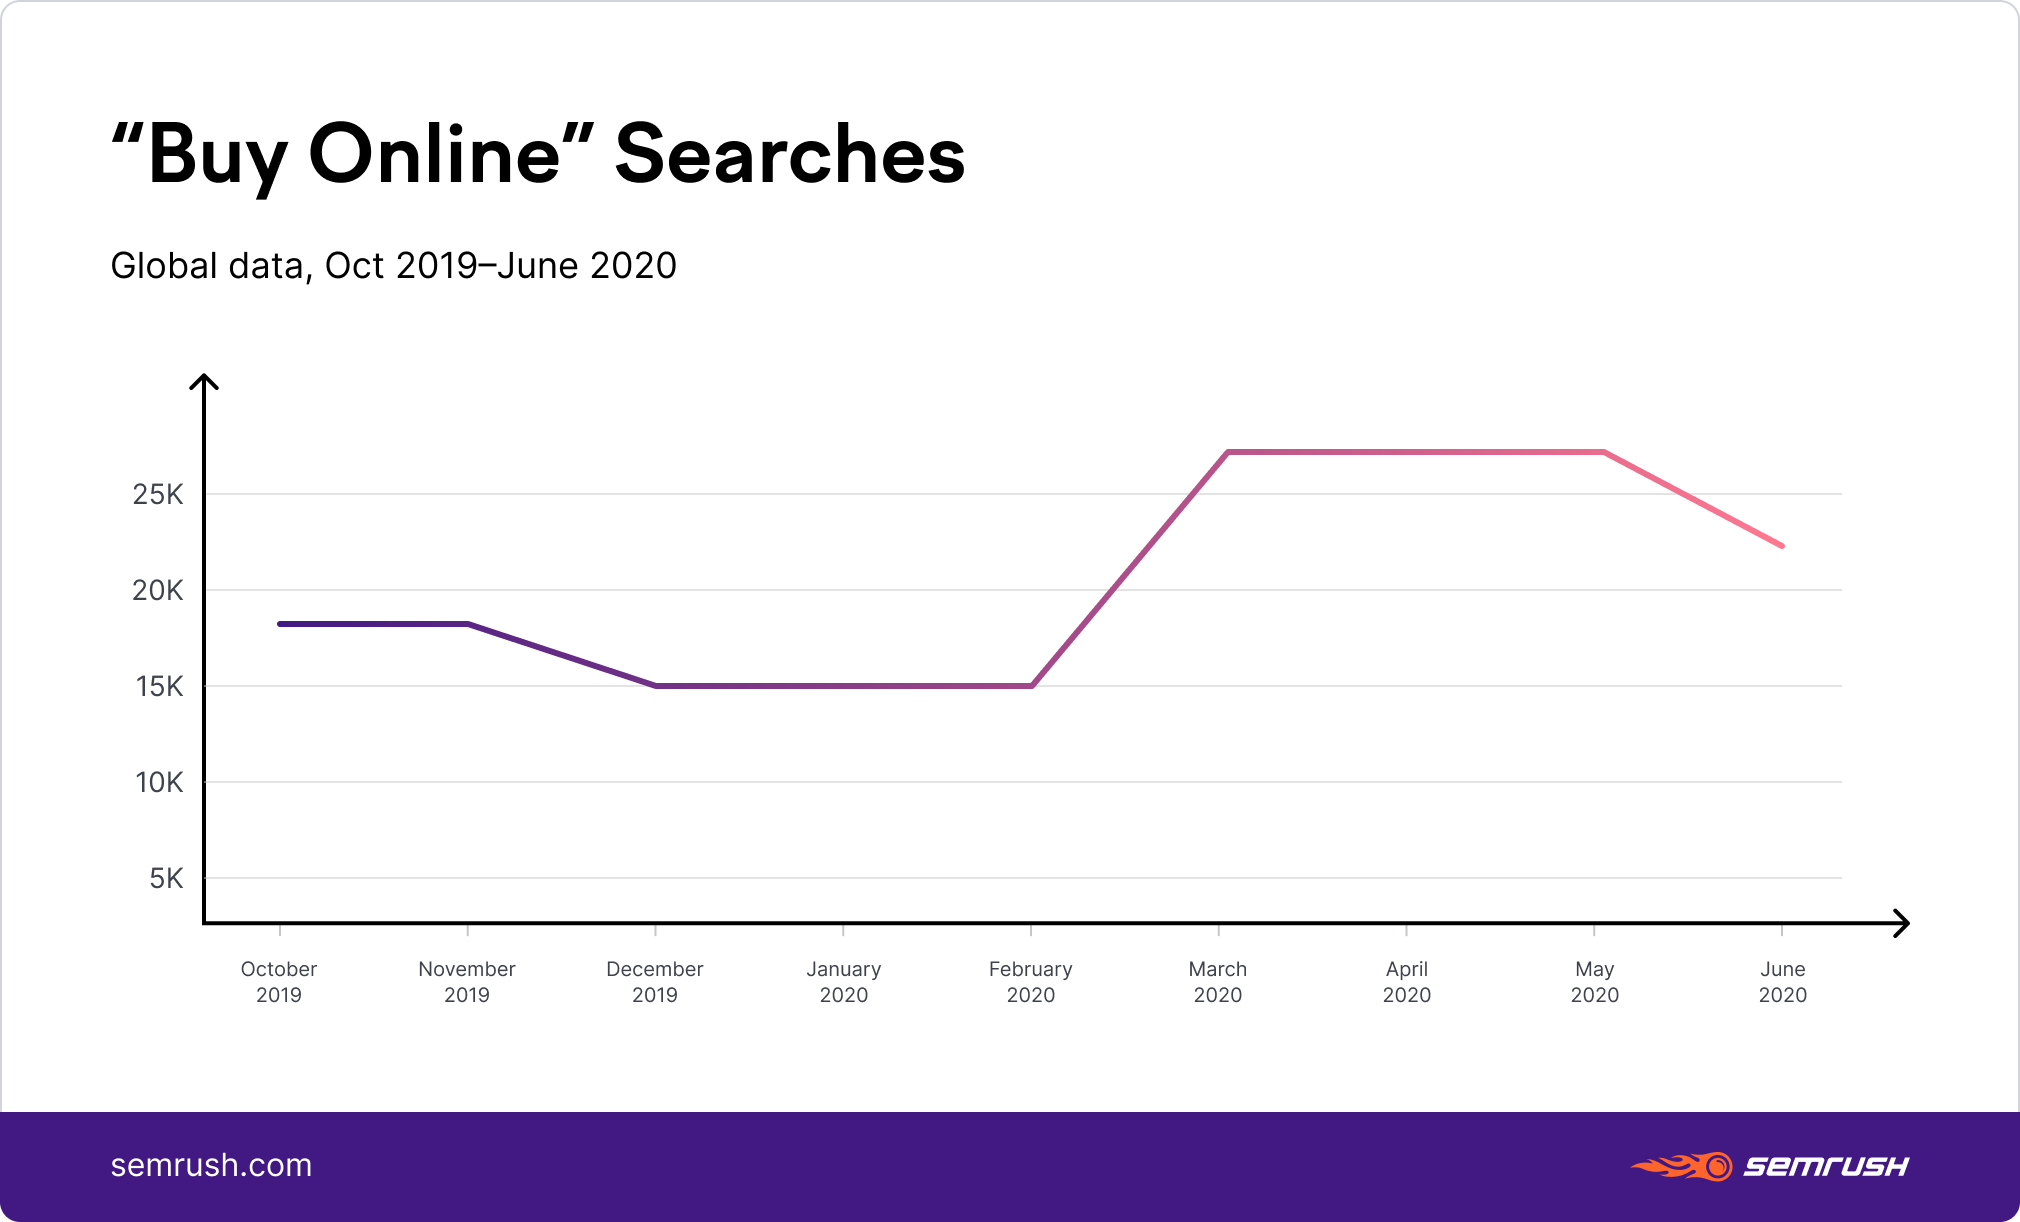 Buy Onlines searches in 2019 and 2020